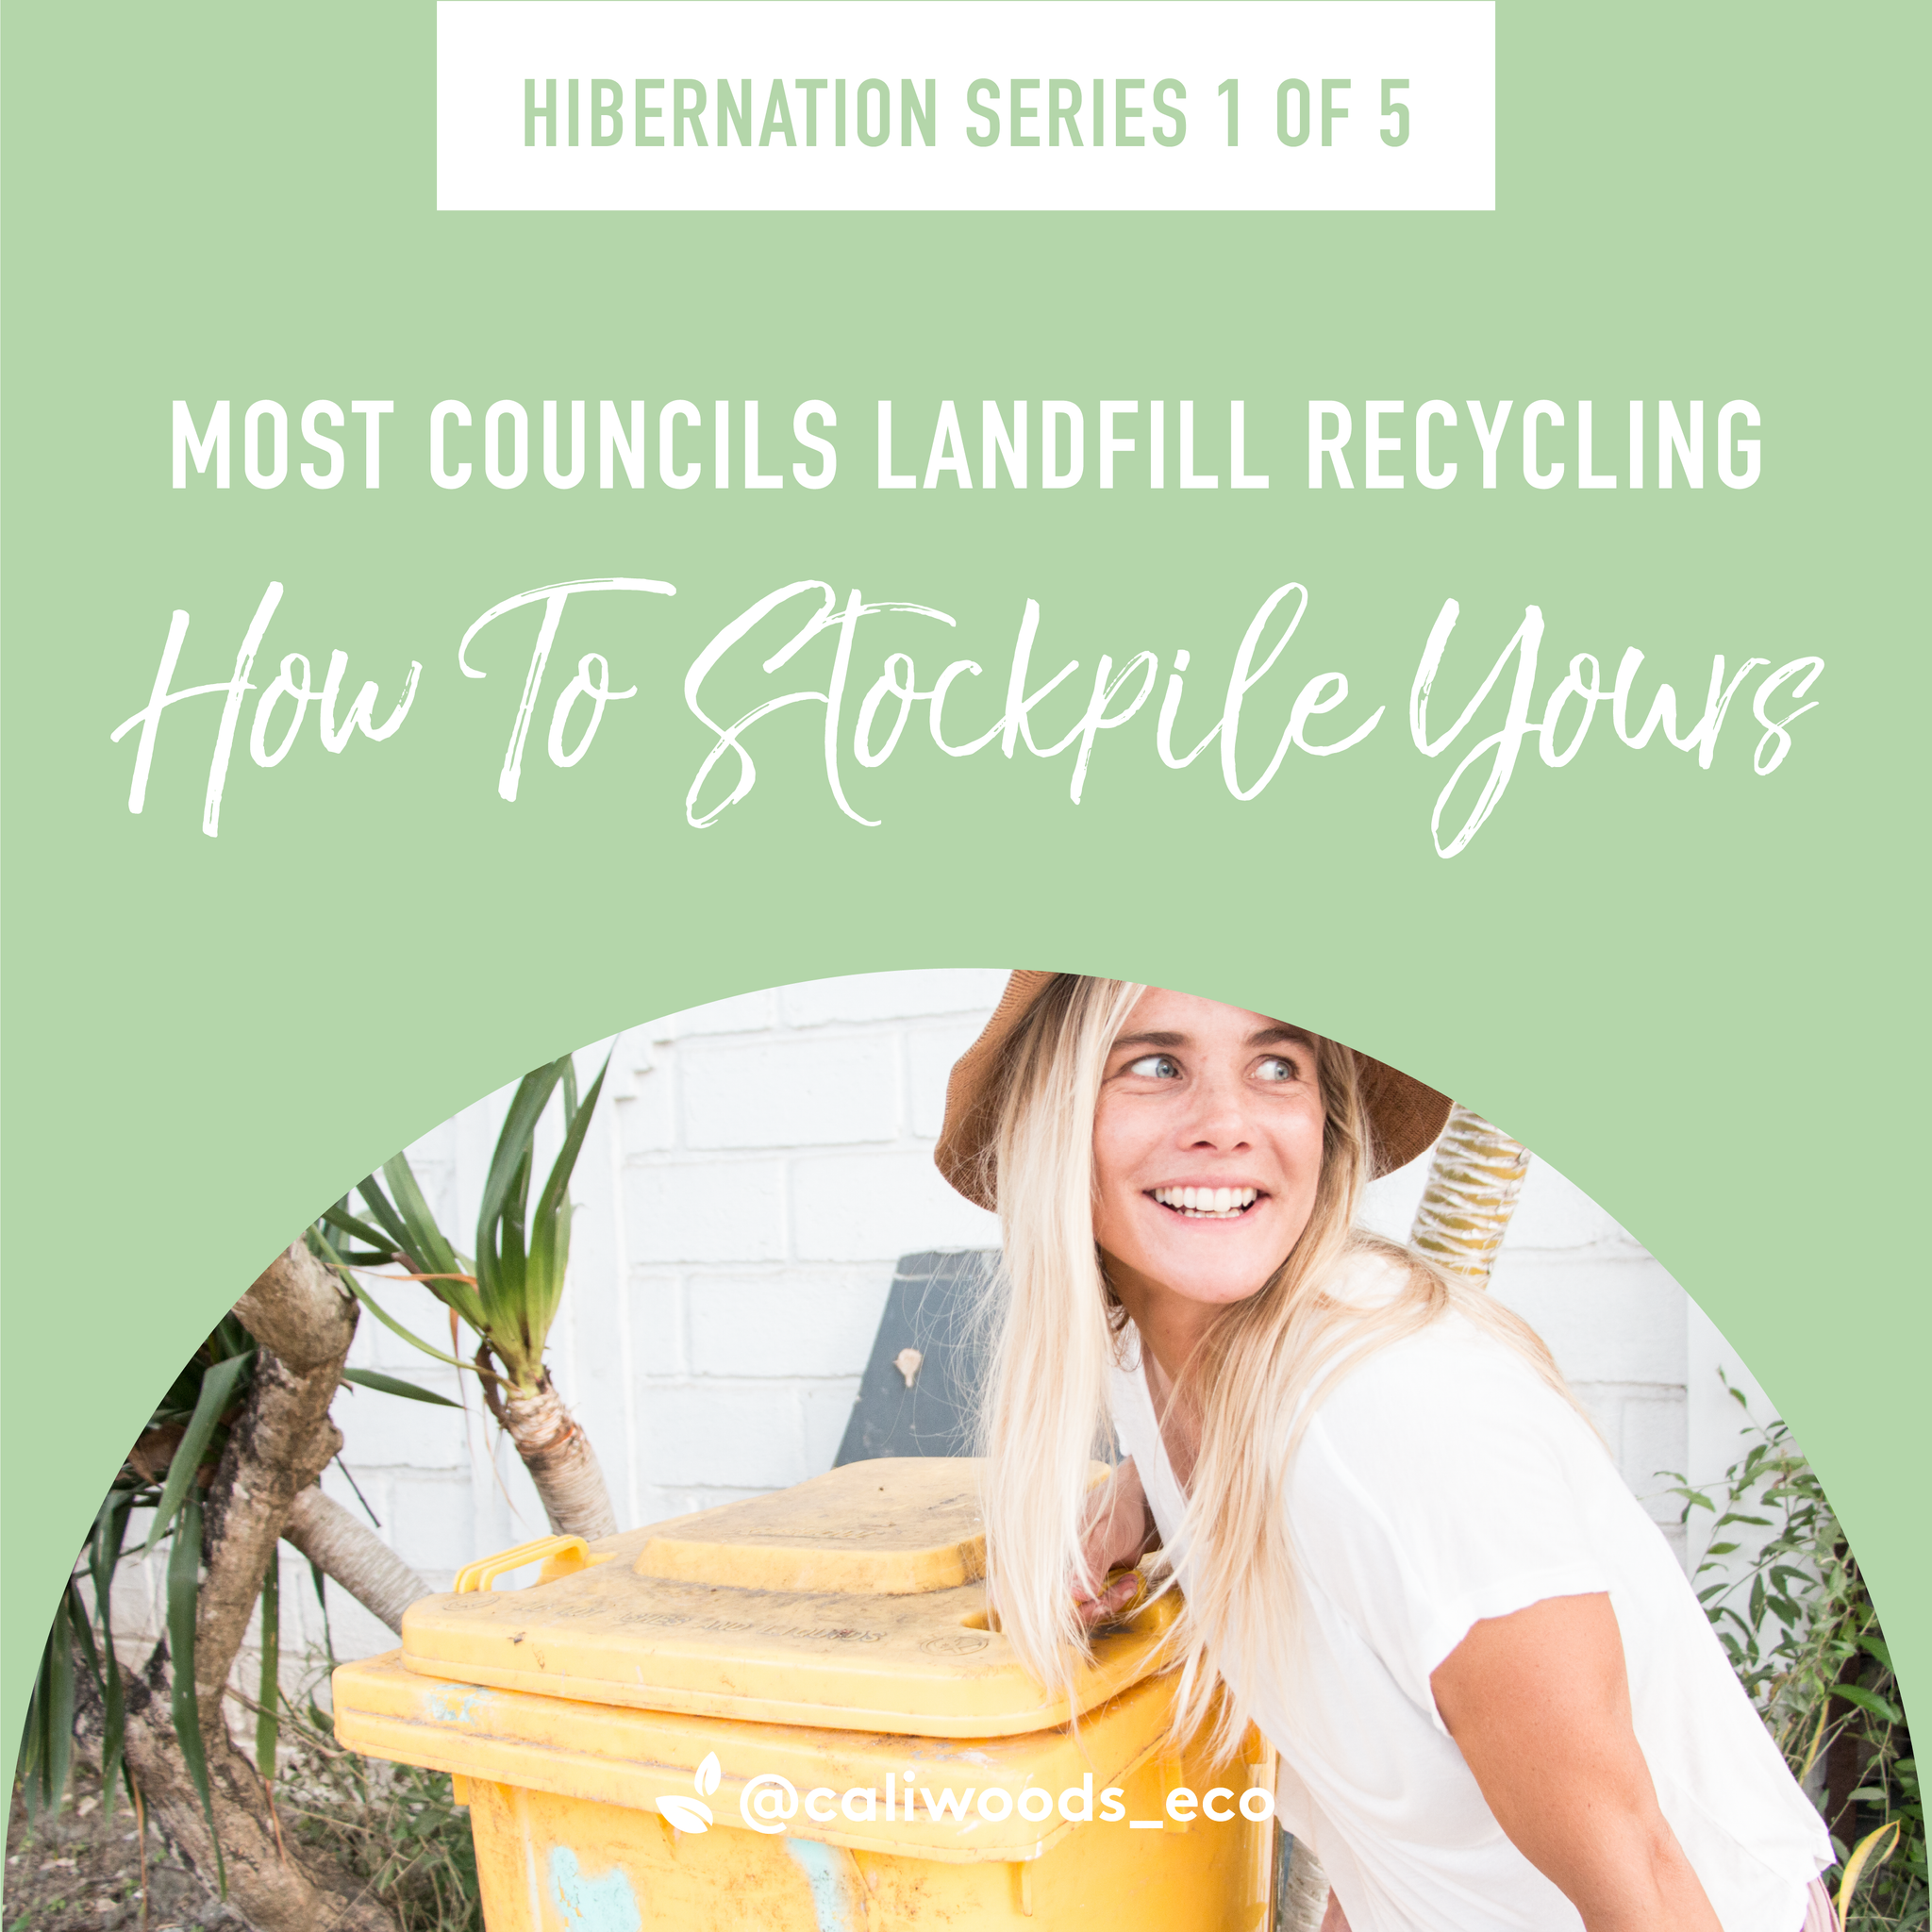 Hibernation Series 1 of 5: How to Stockpile Recycling